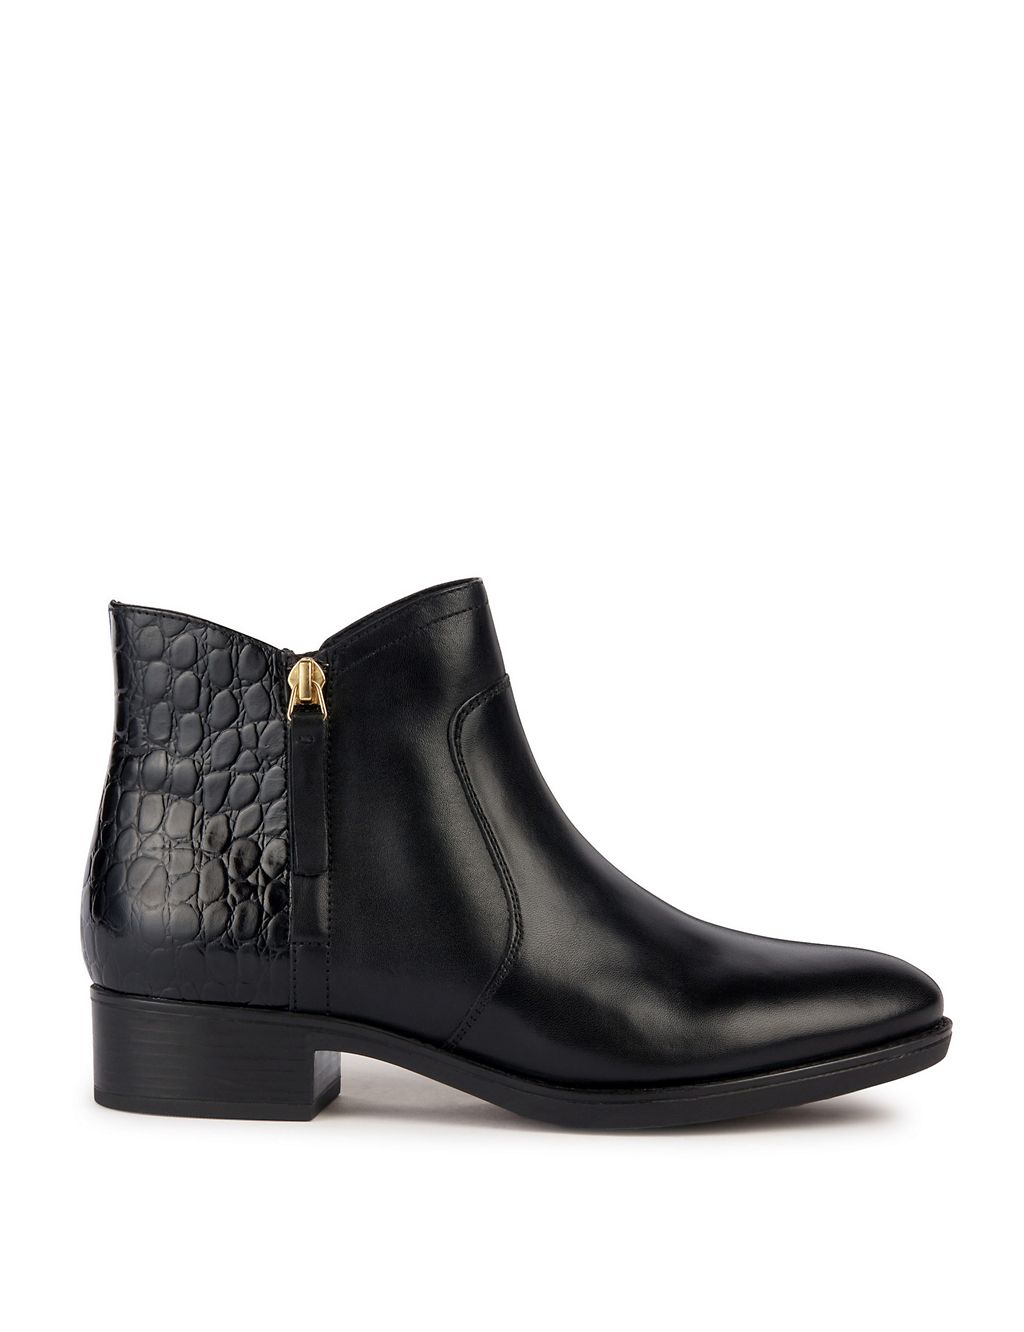 Leather Block Heel Ankle Boots | Geox | M&S